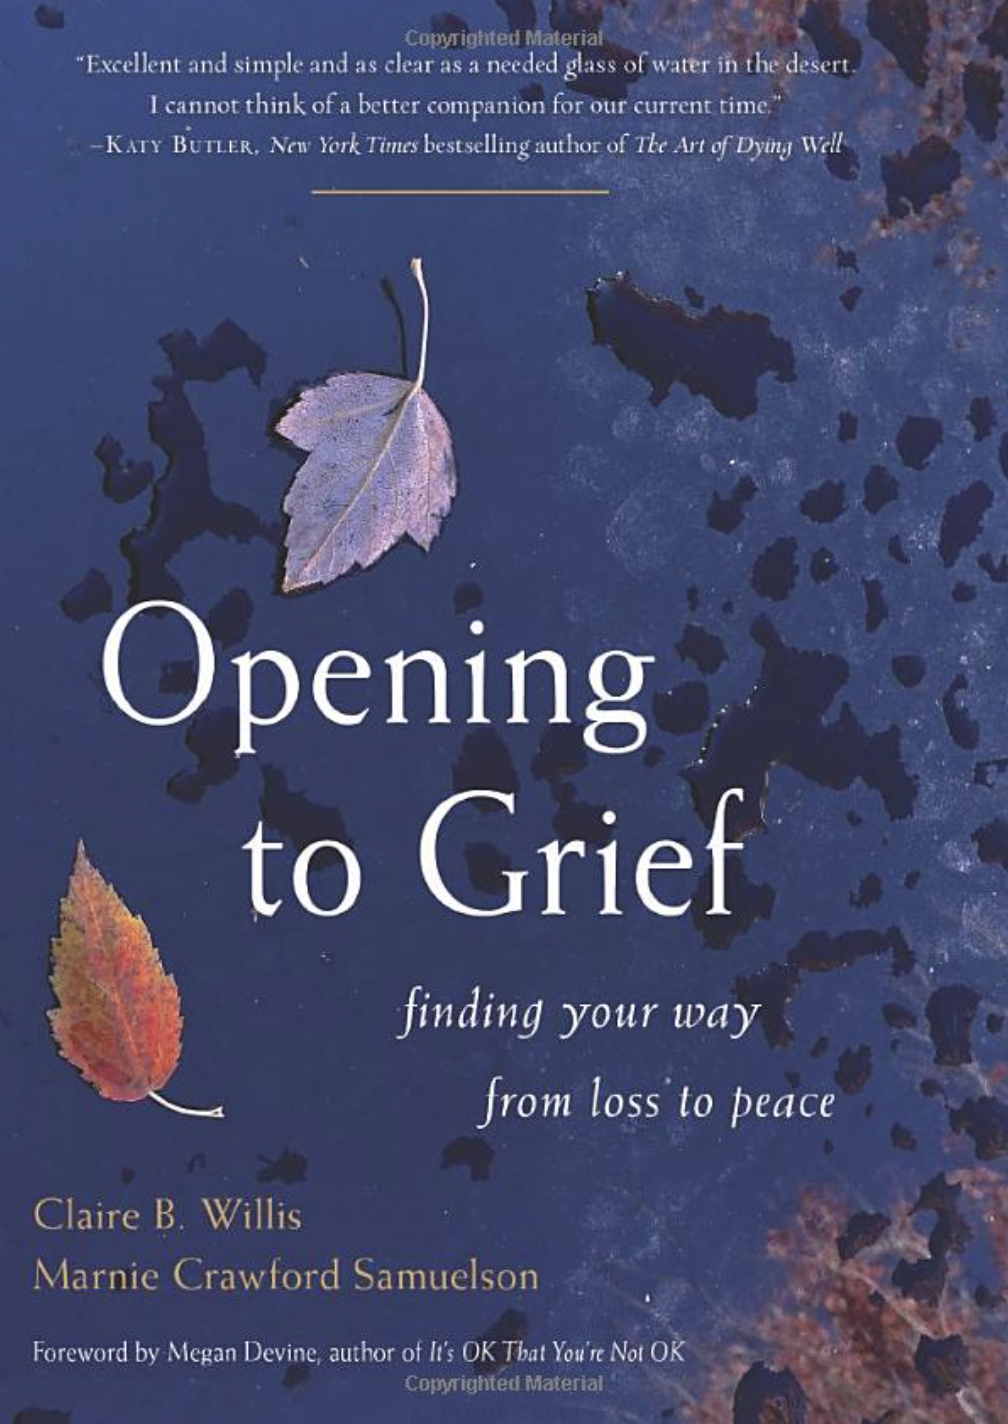 Books to Die For Video: Opening to Grief | A Good Goodbye